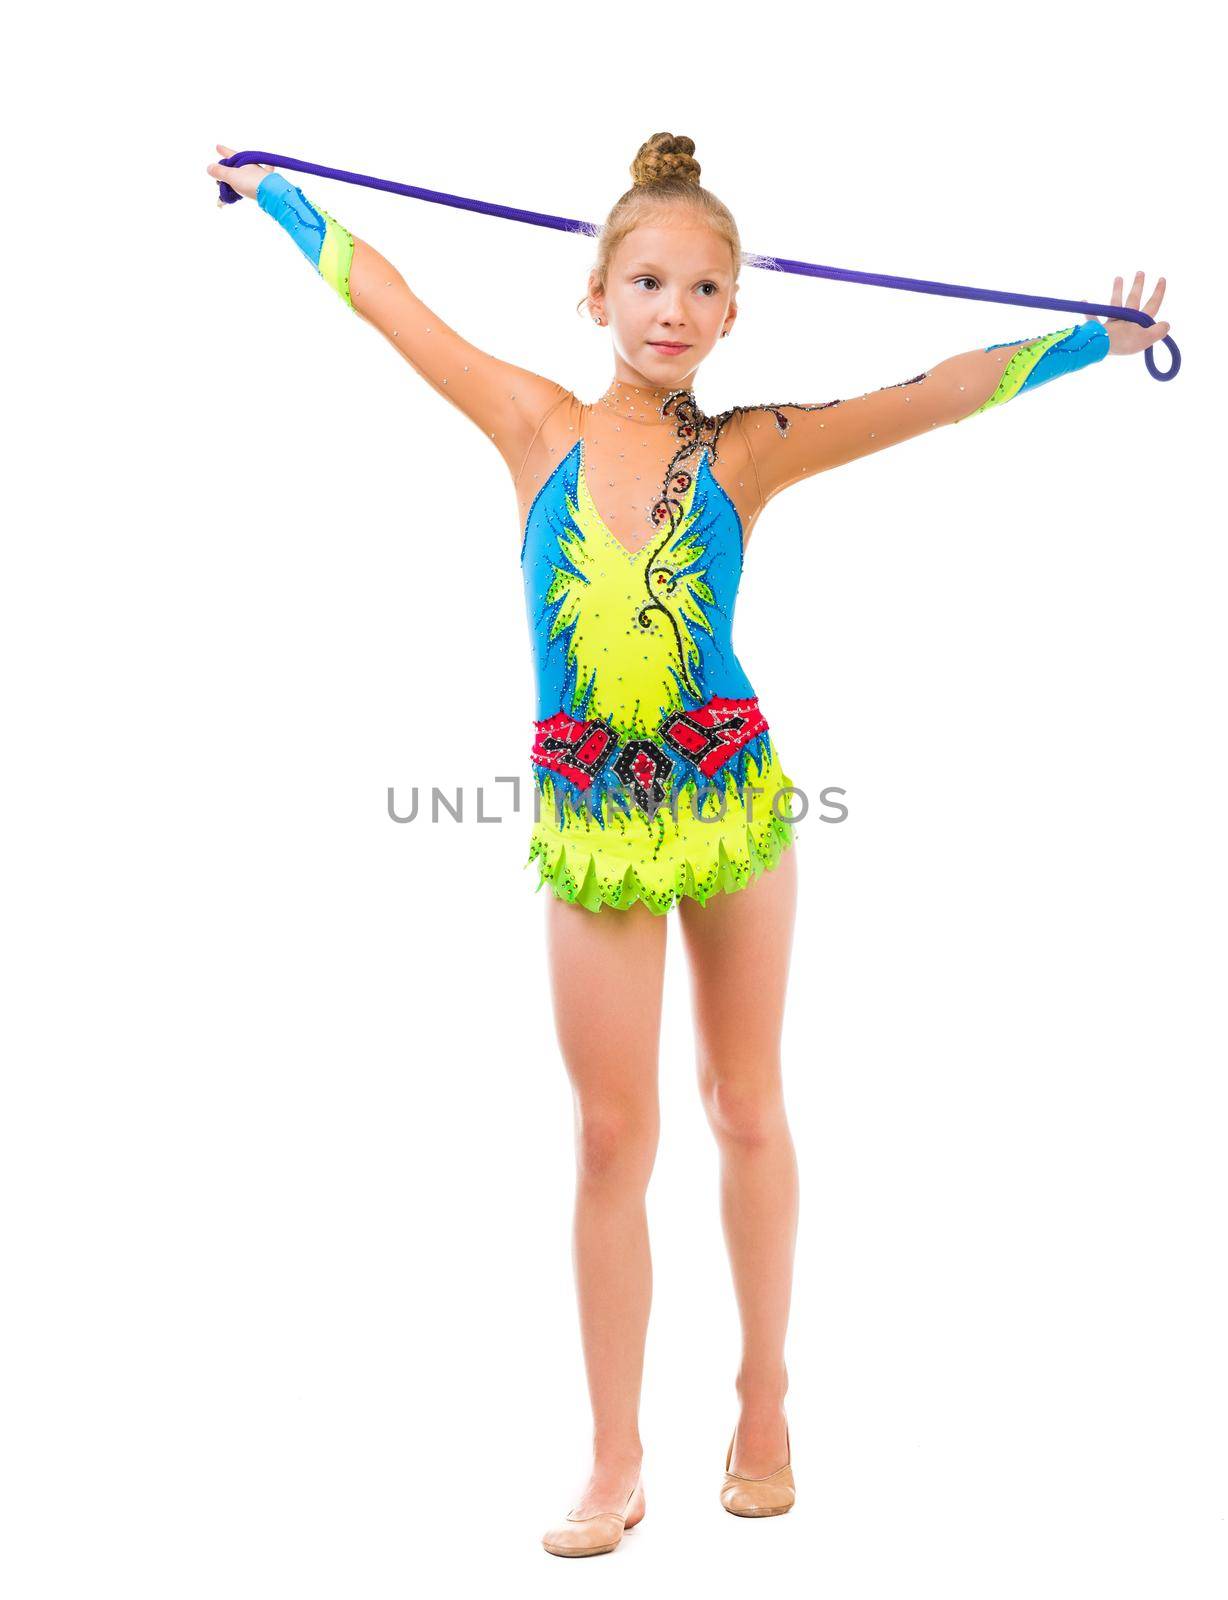 little gymnast holding a skipping rope over her head isolated on white background